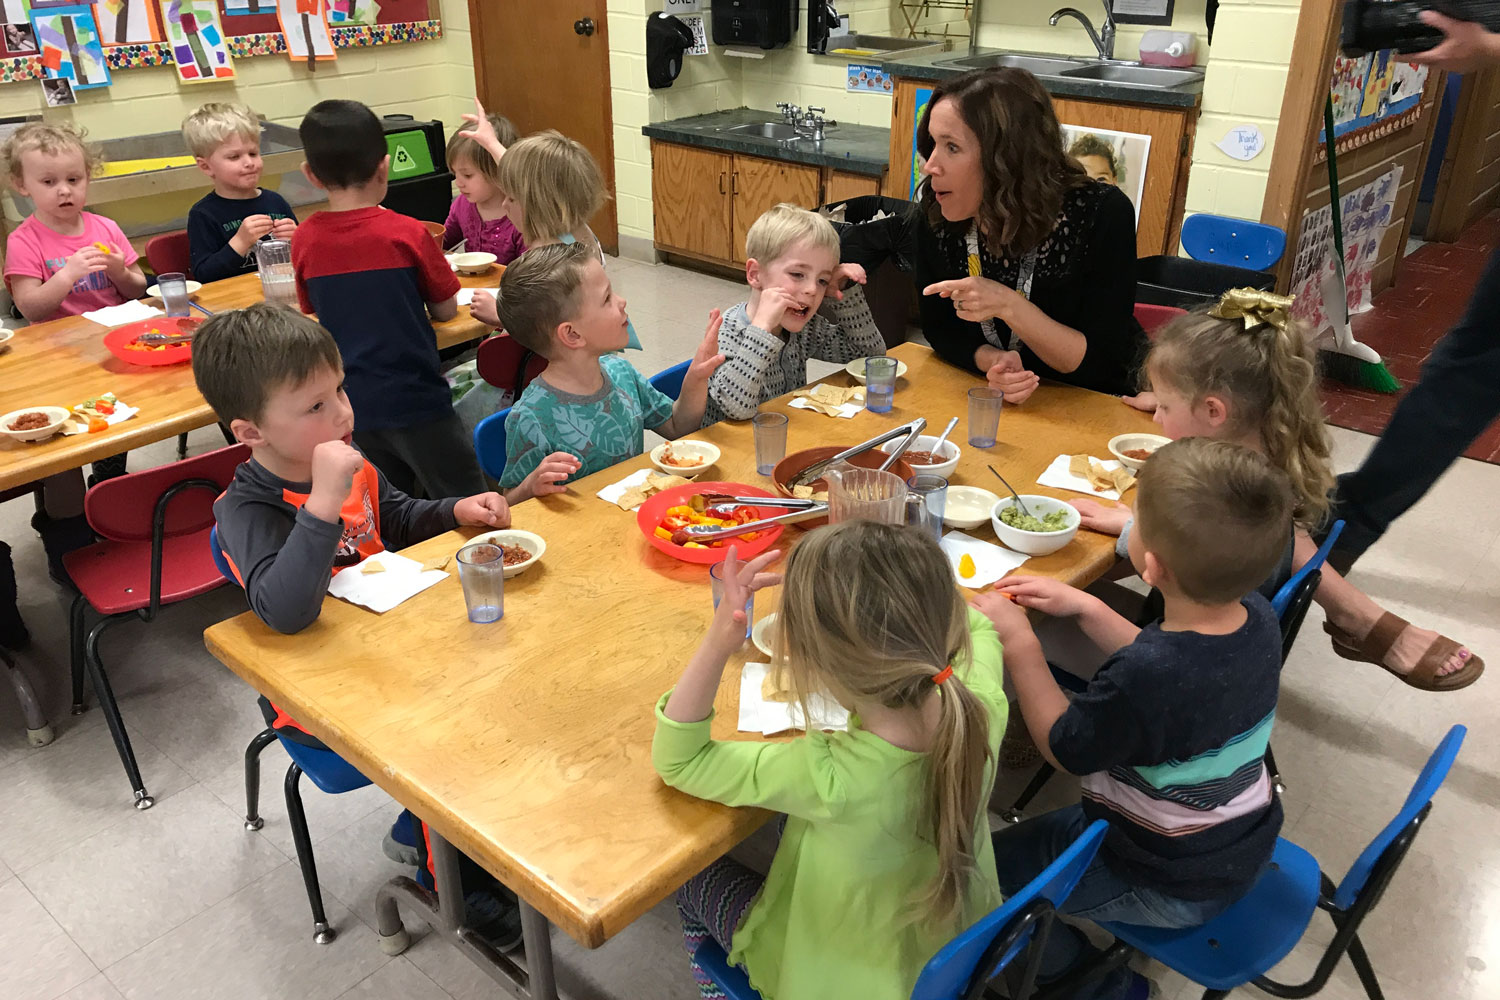 Family Style Meal at Snack Time at Preschool